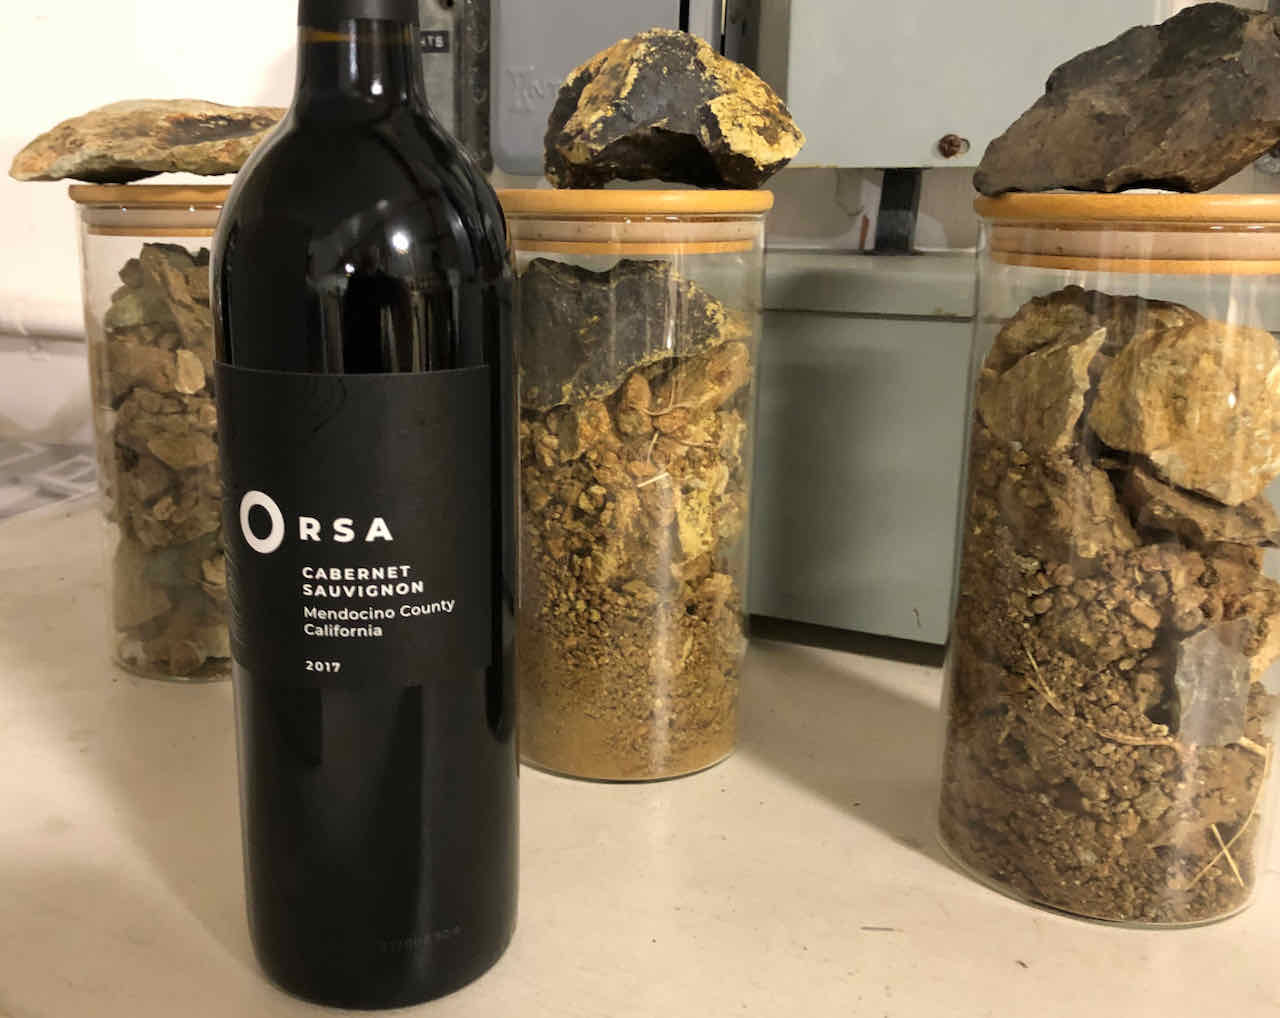 Orsa wine and rock soil